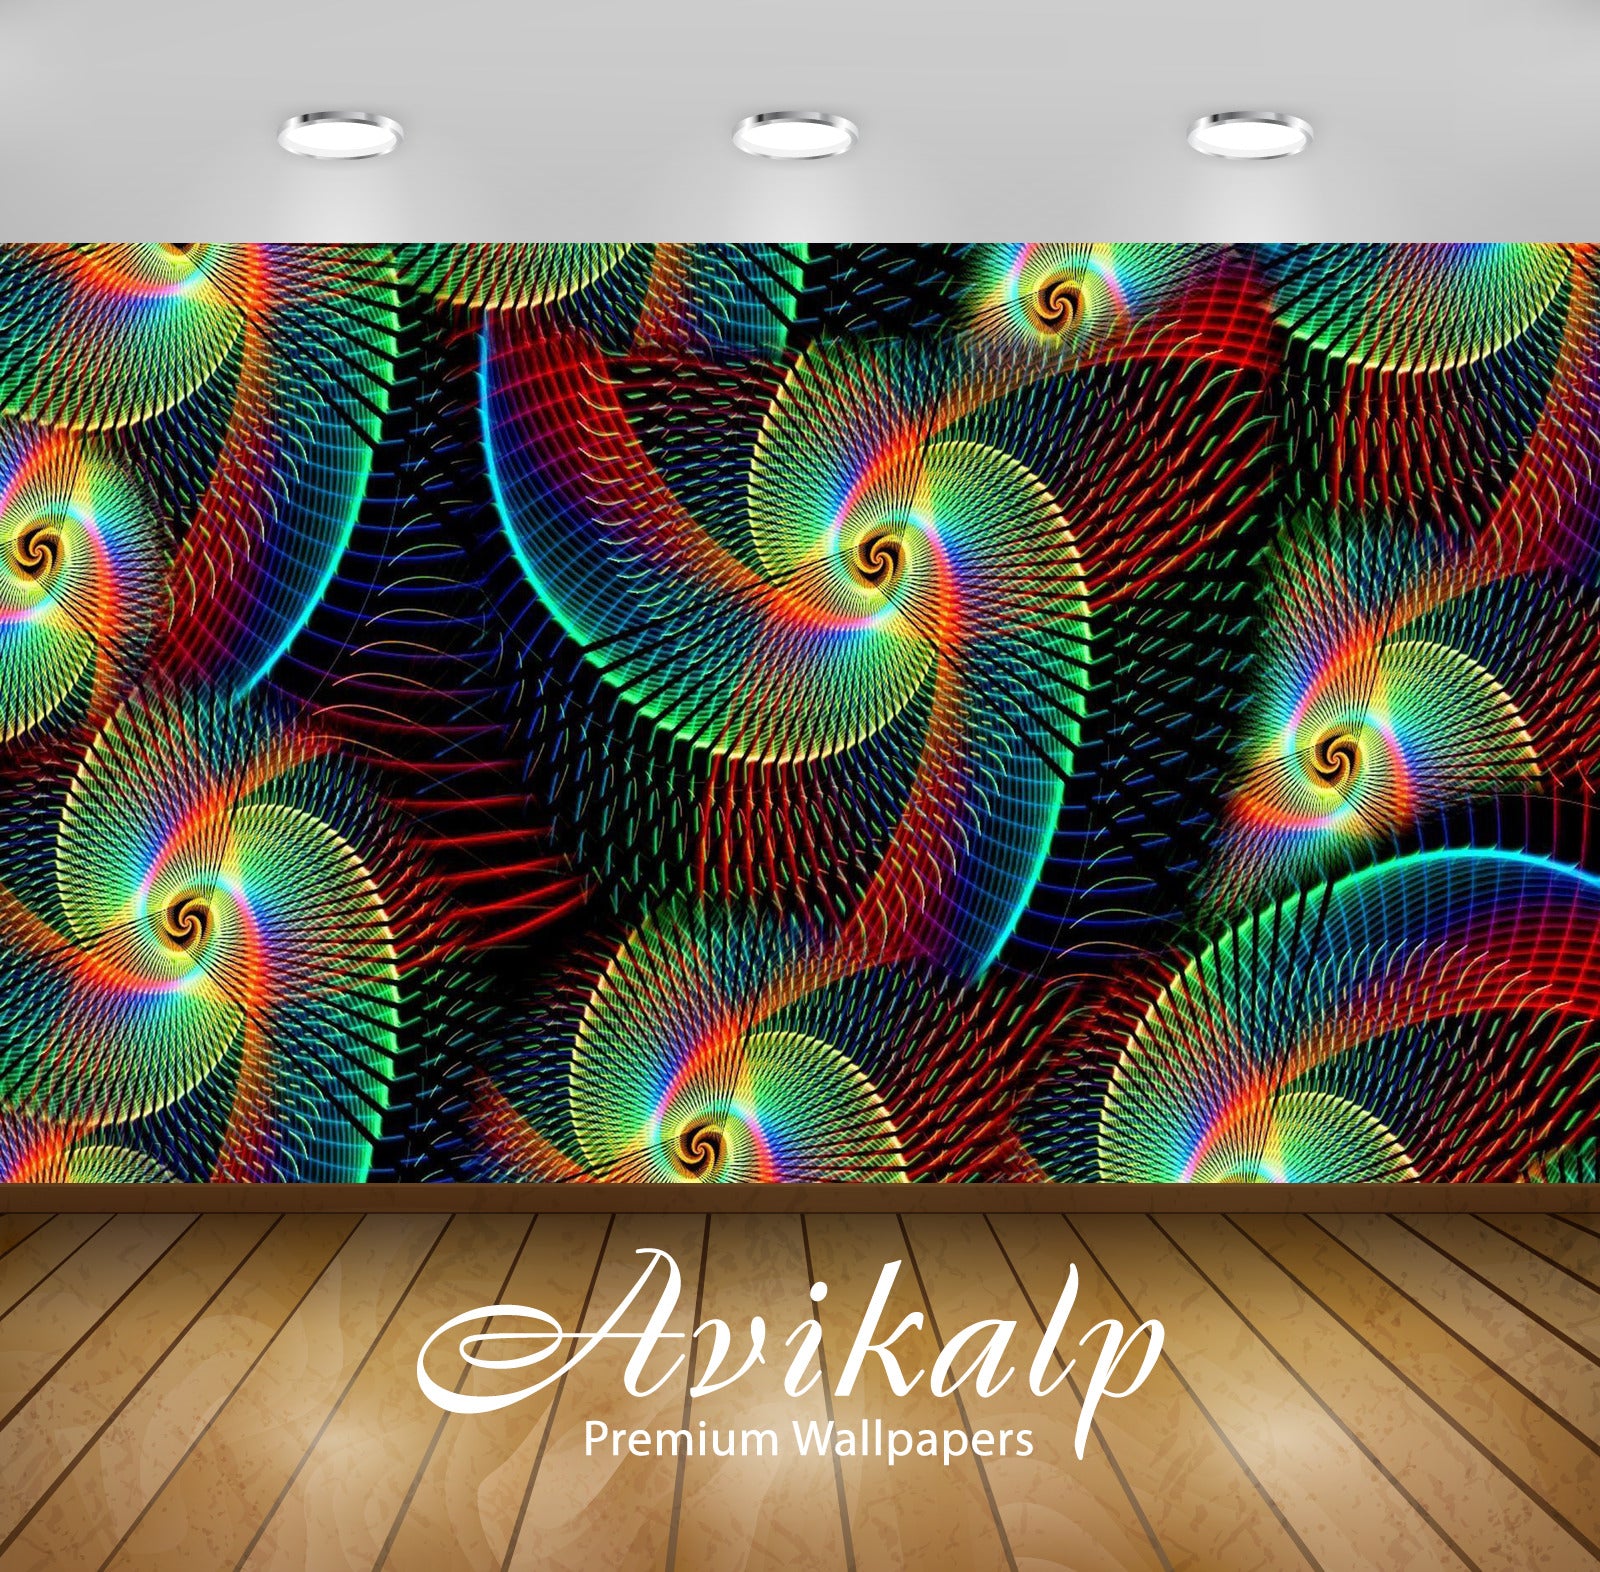 Avikalp Exclusive Awi4593 Rainbow Swirls Full HD Wallpapers for Living room, Hall, Kids Room, Kitche